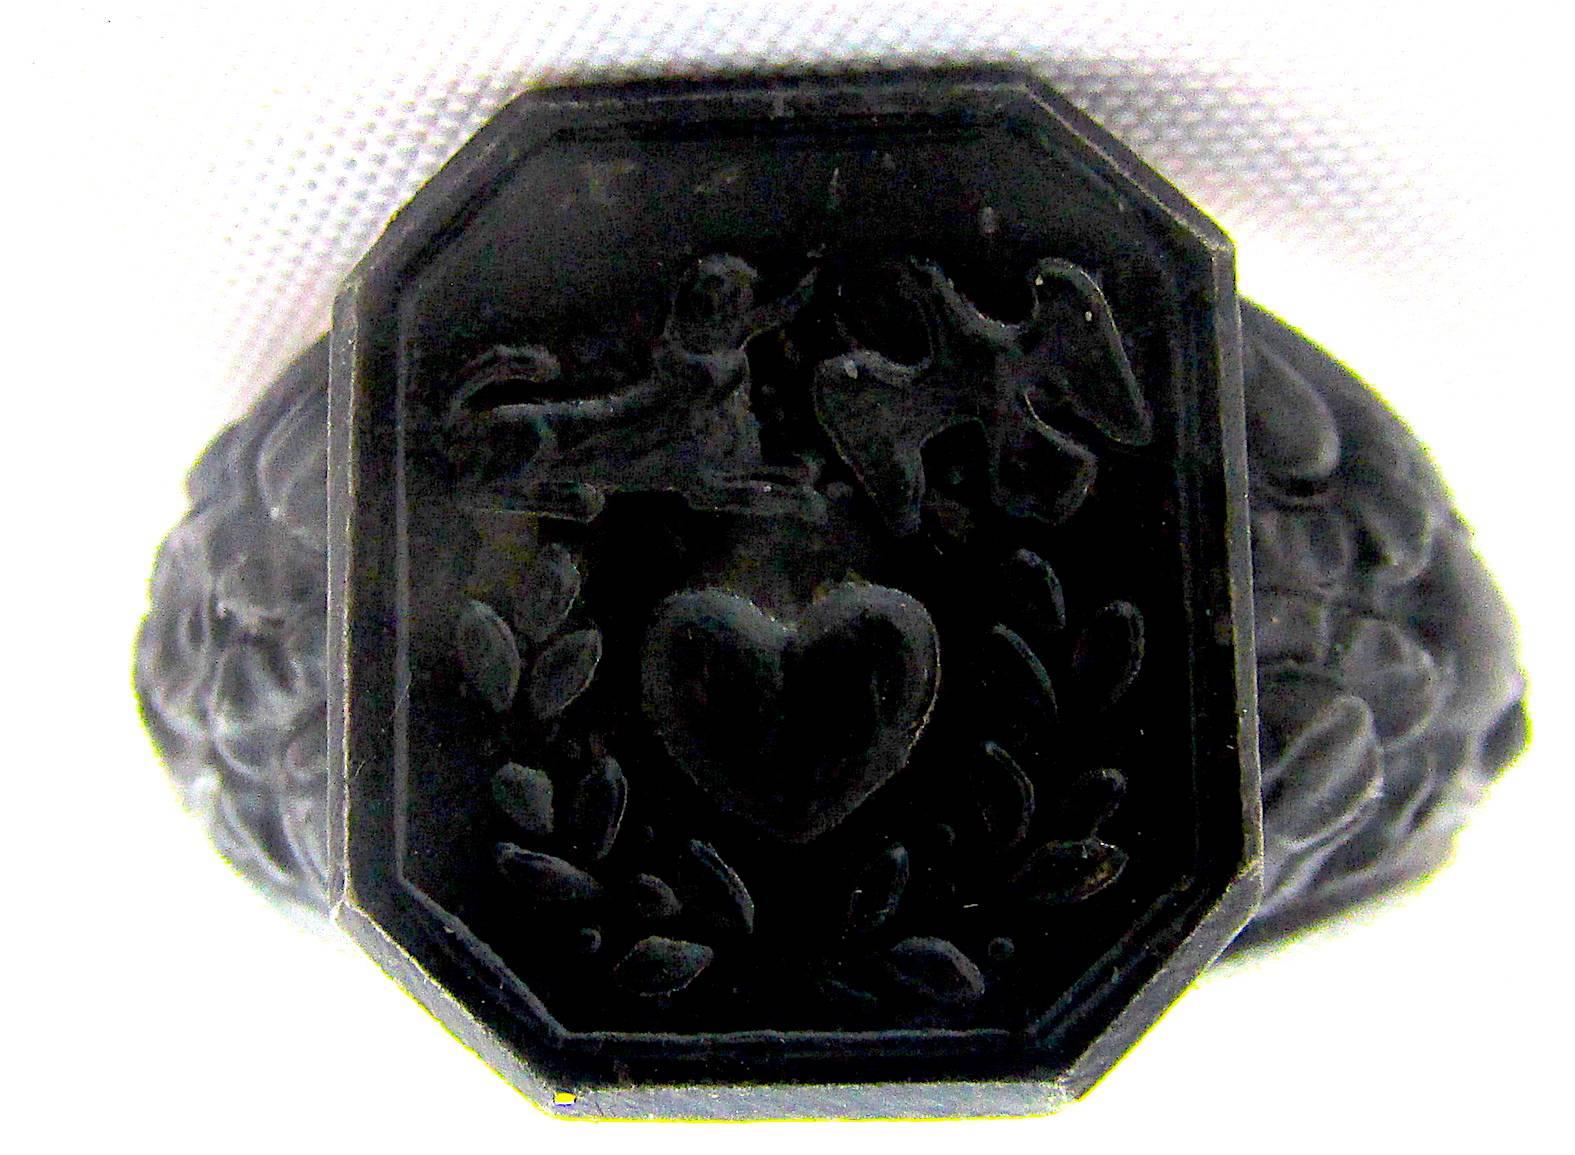 Fabulous Berlin iron ring decorated with symbols associated with faith (dove) love (heart) and loyalty (dog). The heart is surrounded by a leafy wreath and surmounted by the dog and the dove. The band has a floral motif, probably laurel leaves.